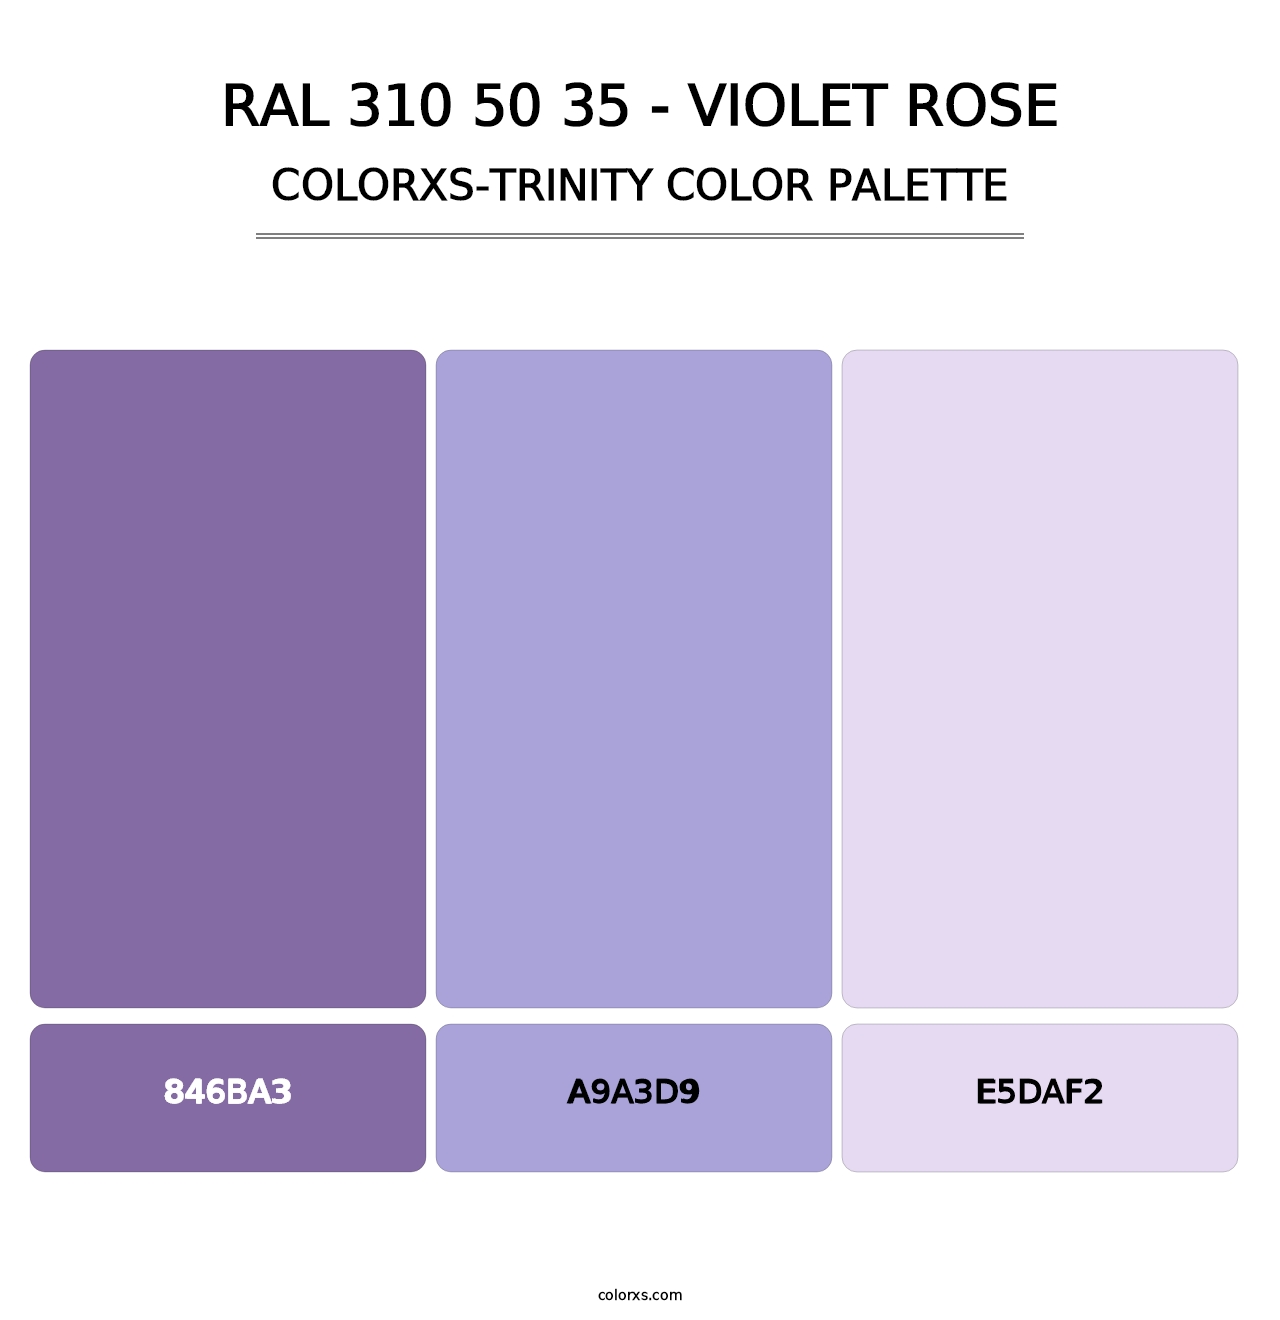 RAL 310 50 35 - Violet Rose - Colorxs Trinity Palette